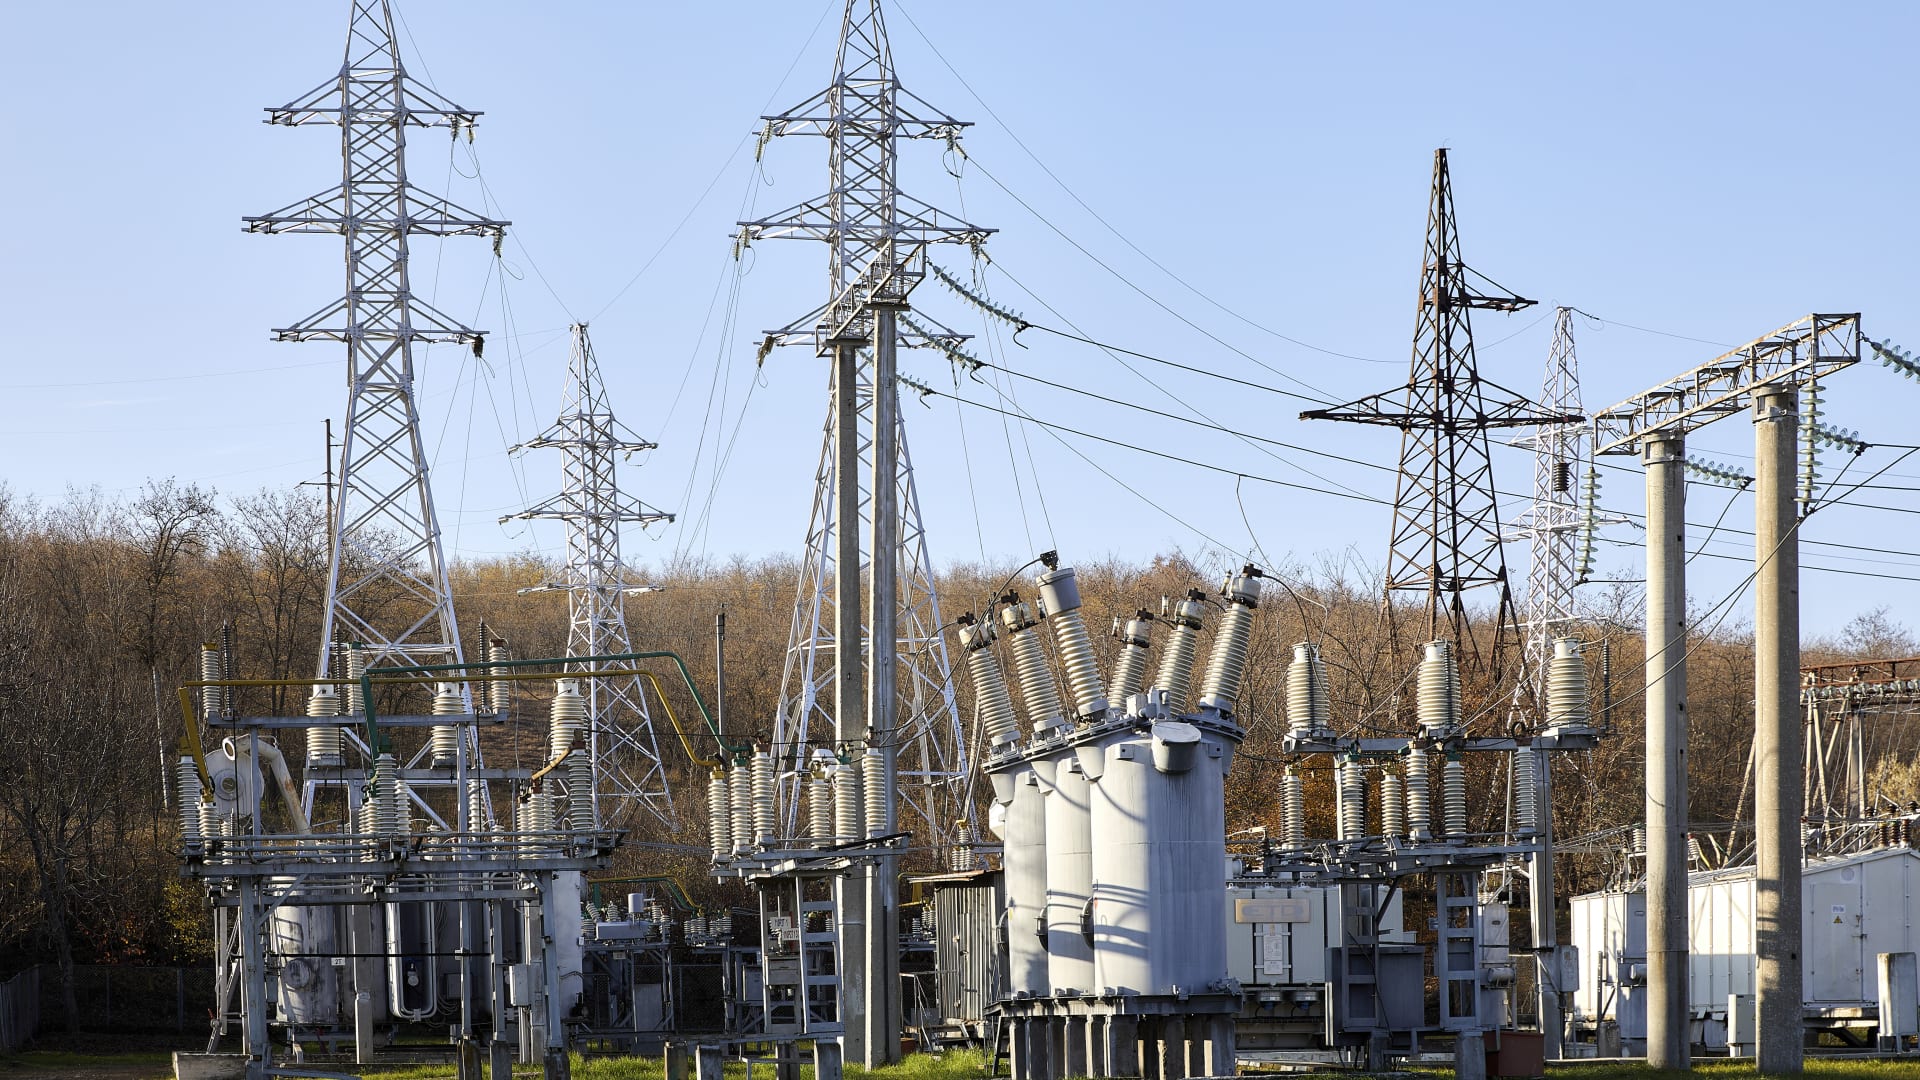 A power station on the outskirts of Chisinau, Moldova, on Oct. 31, 2022.